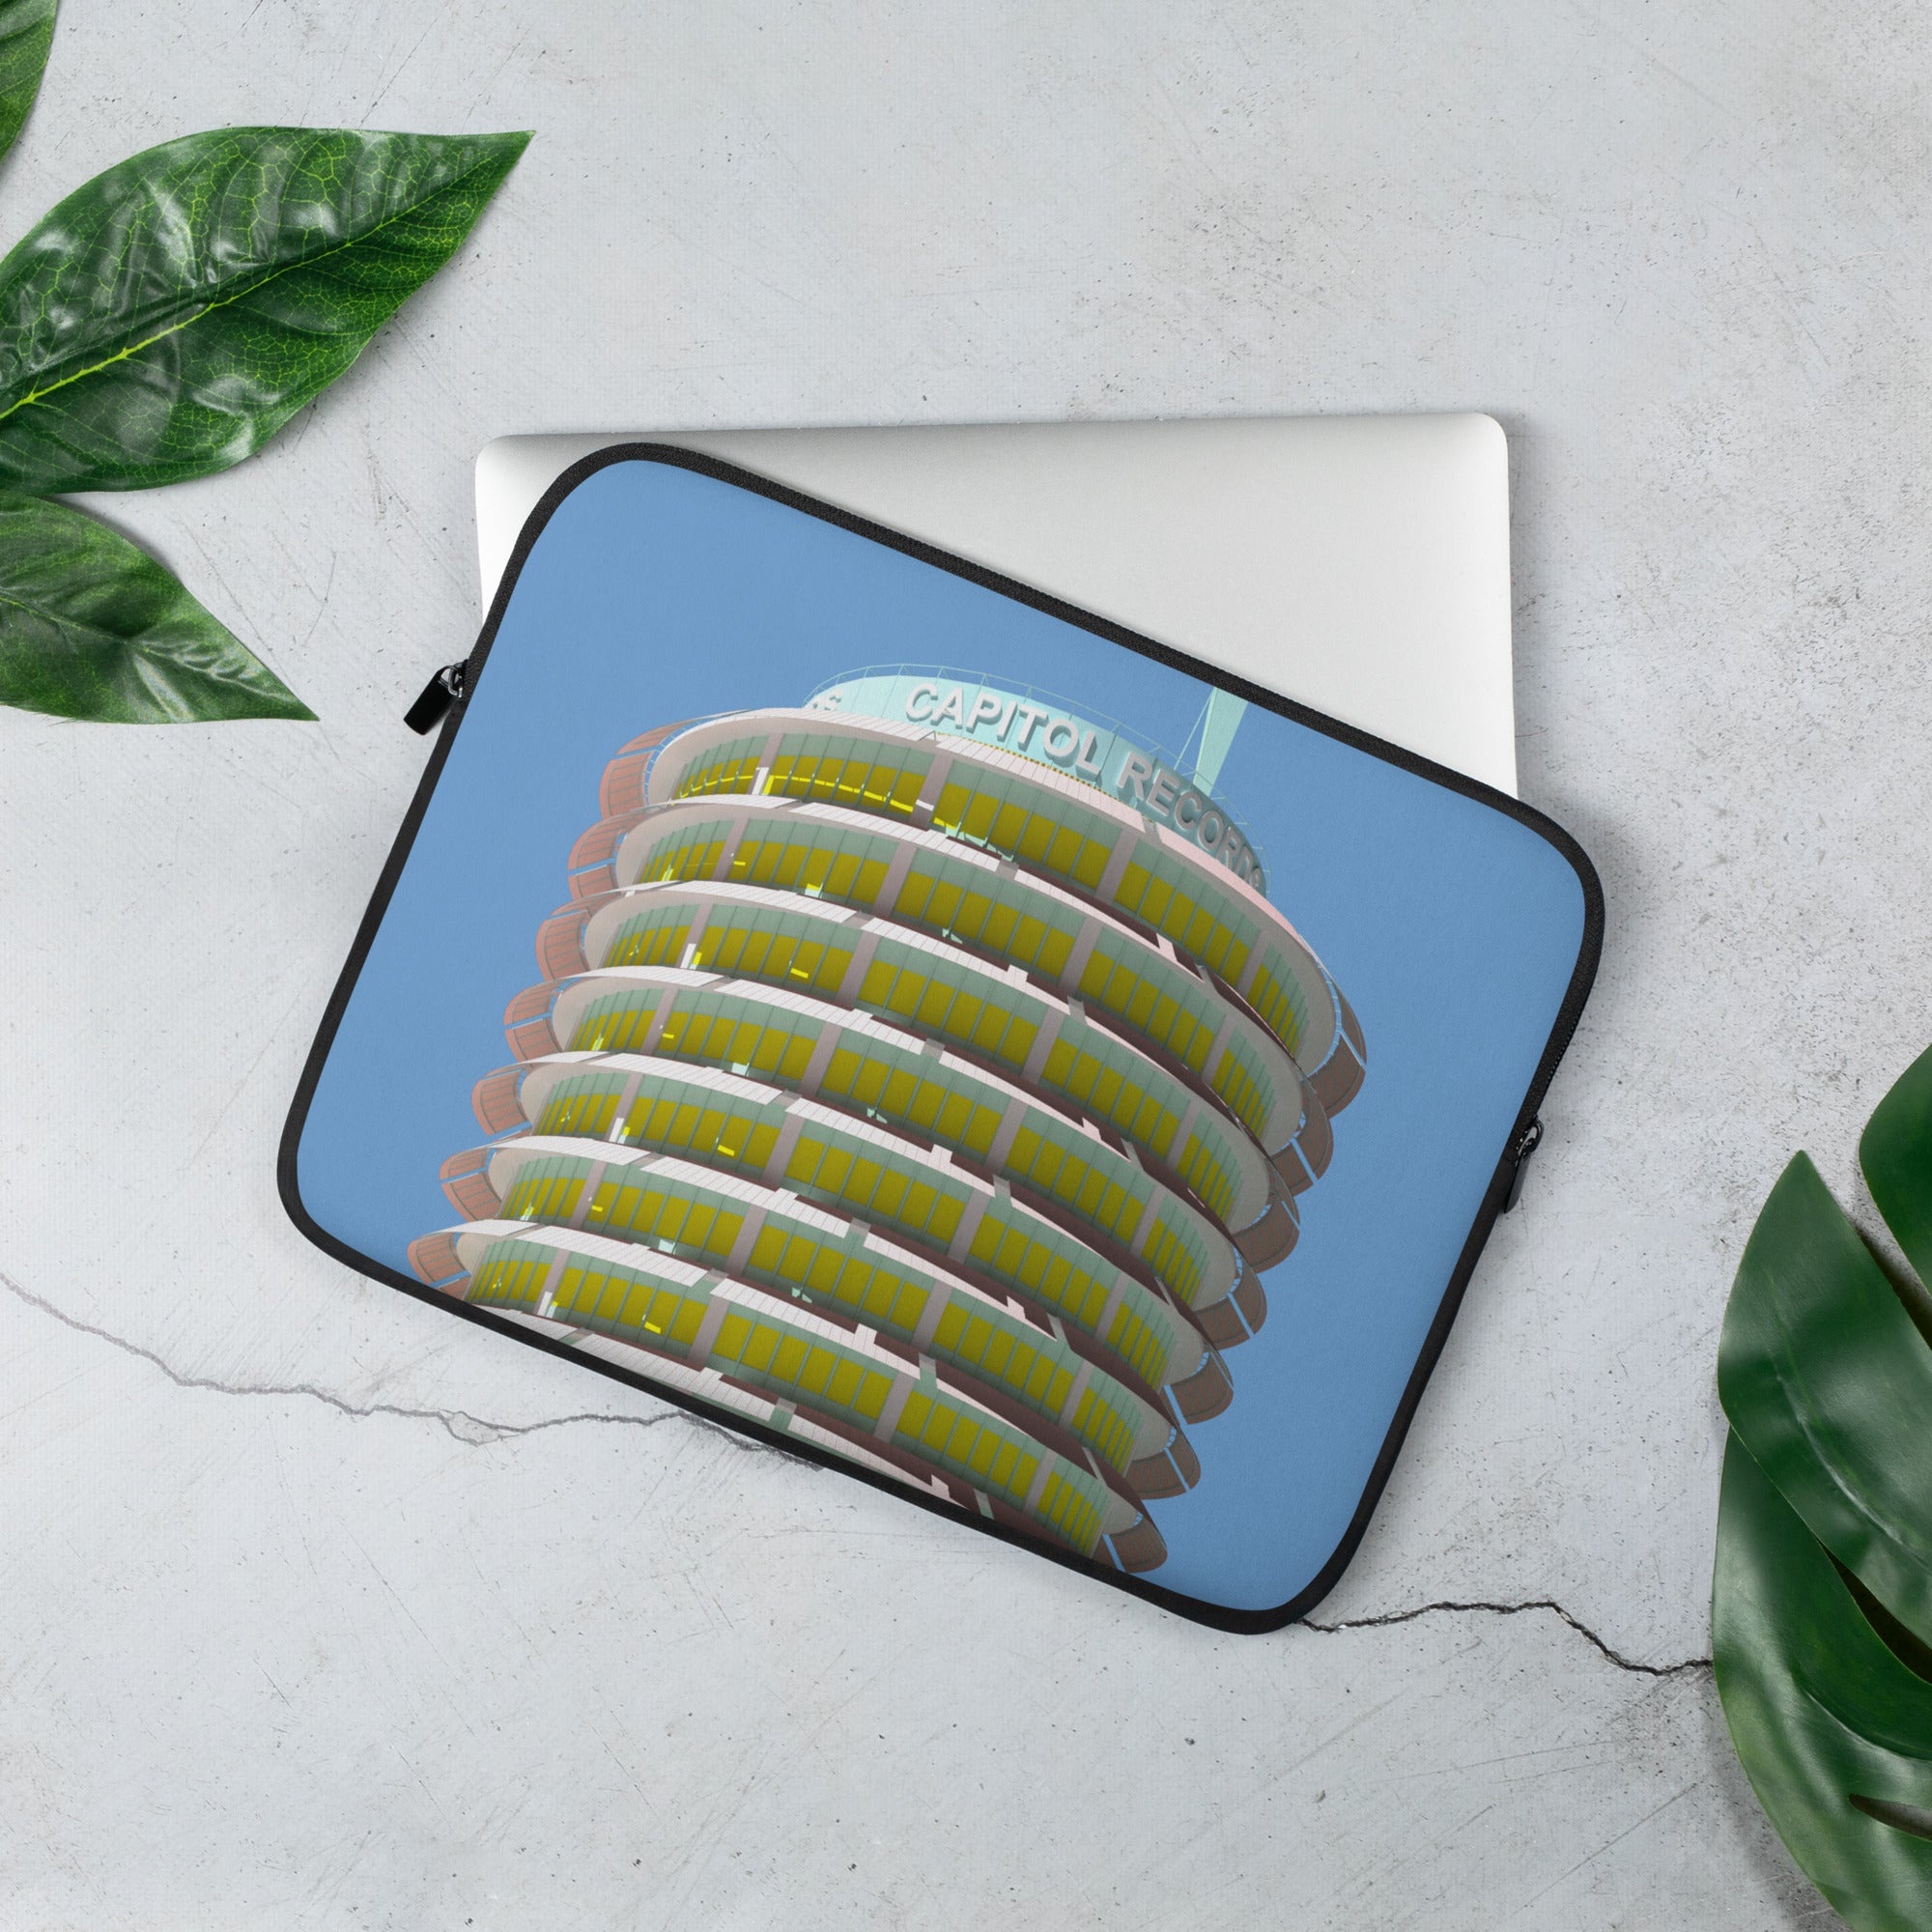 Capitol Records Building Laptop Sleeves